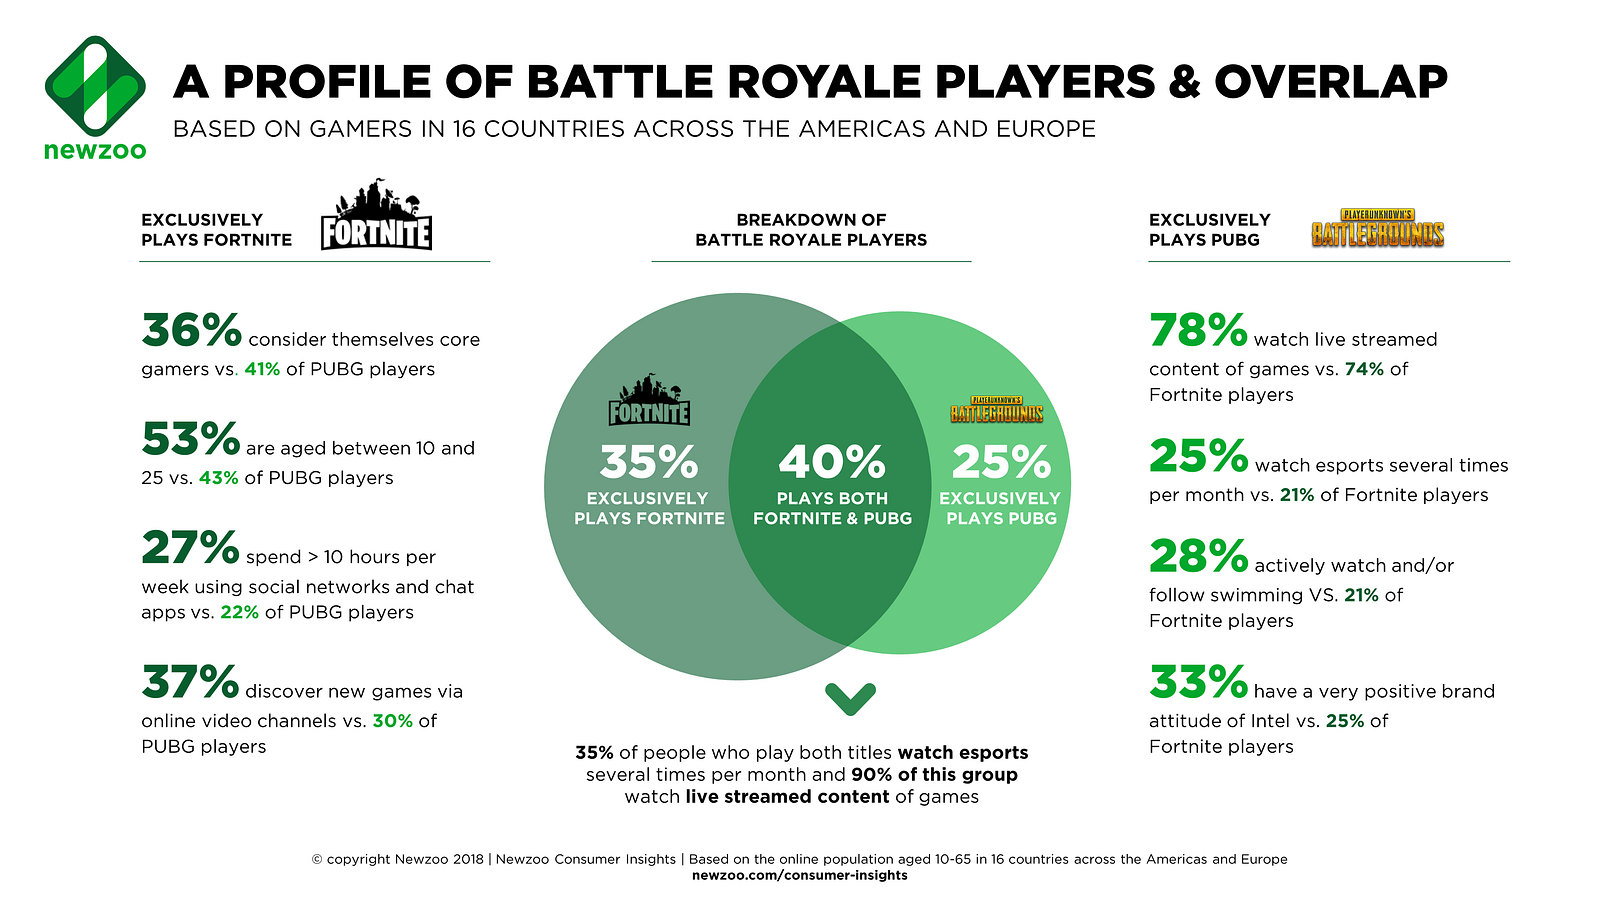 pubg players are also more likely to identify as core gamers while a larger share of fortnite players indentifies as a casual gamer 24 versus 17 - fortnite demographics age